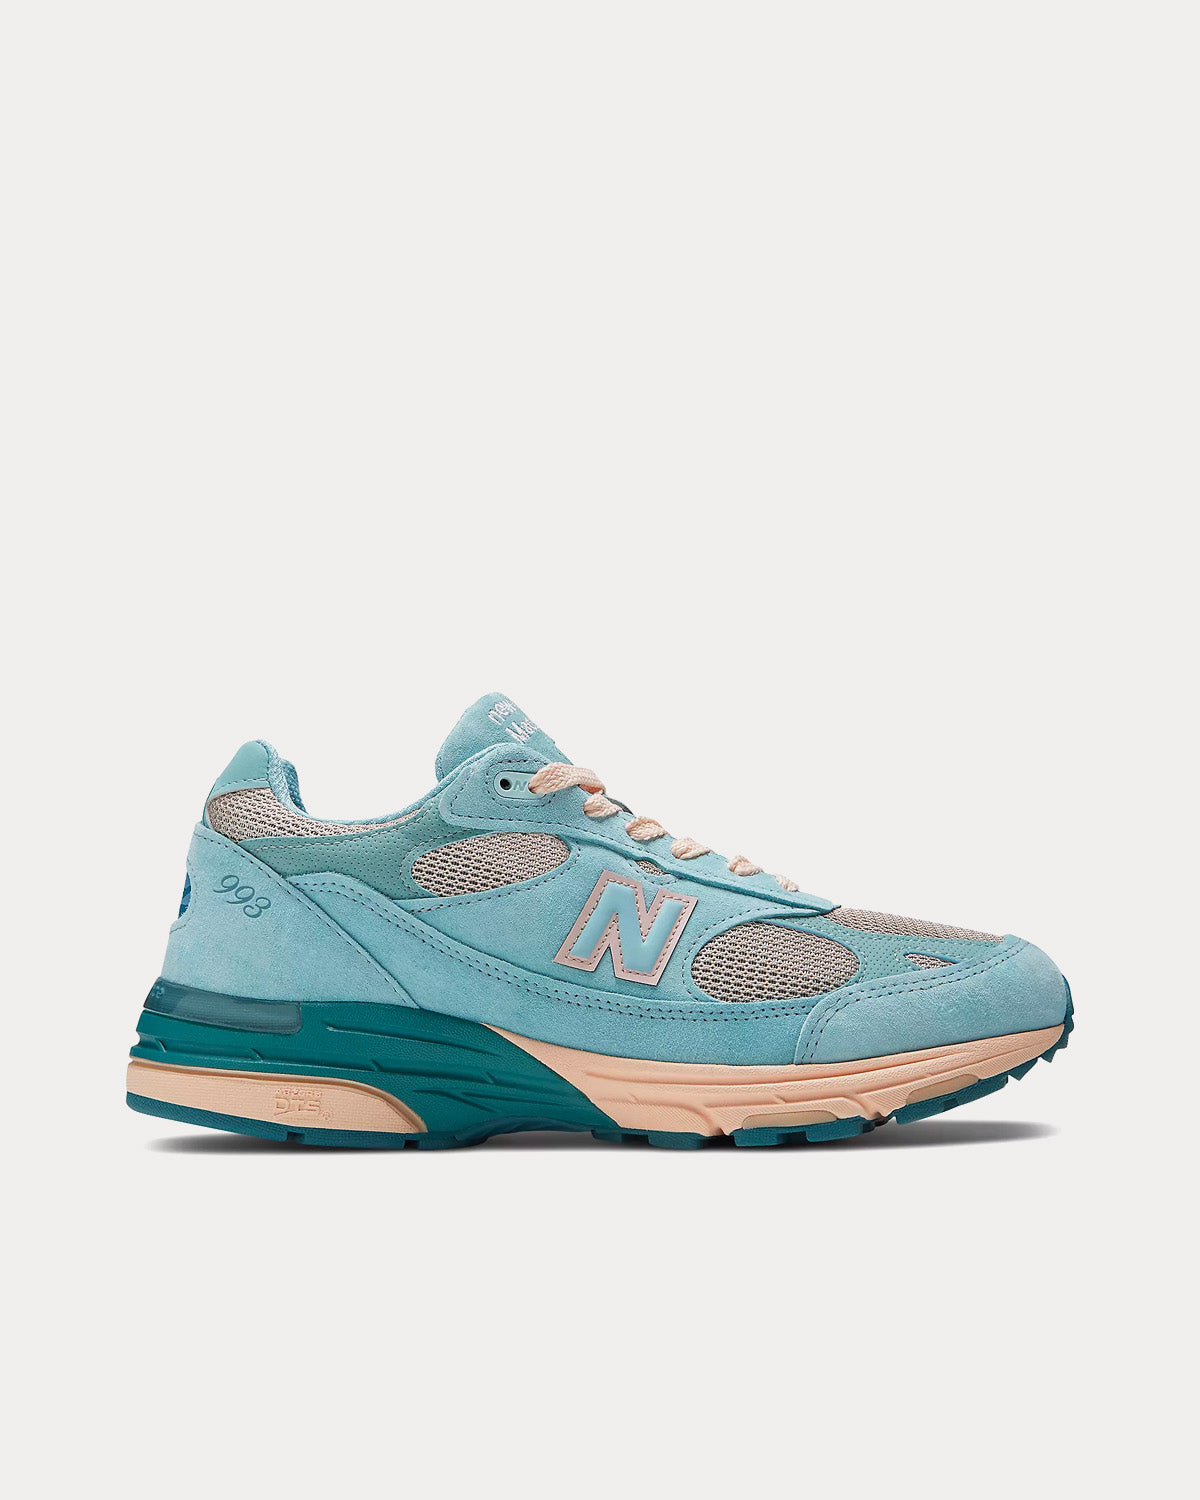 New Balance x Joe Freshgoods - MADE in USA 993 Blue / Vintage Rose Low Top Sneakers